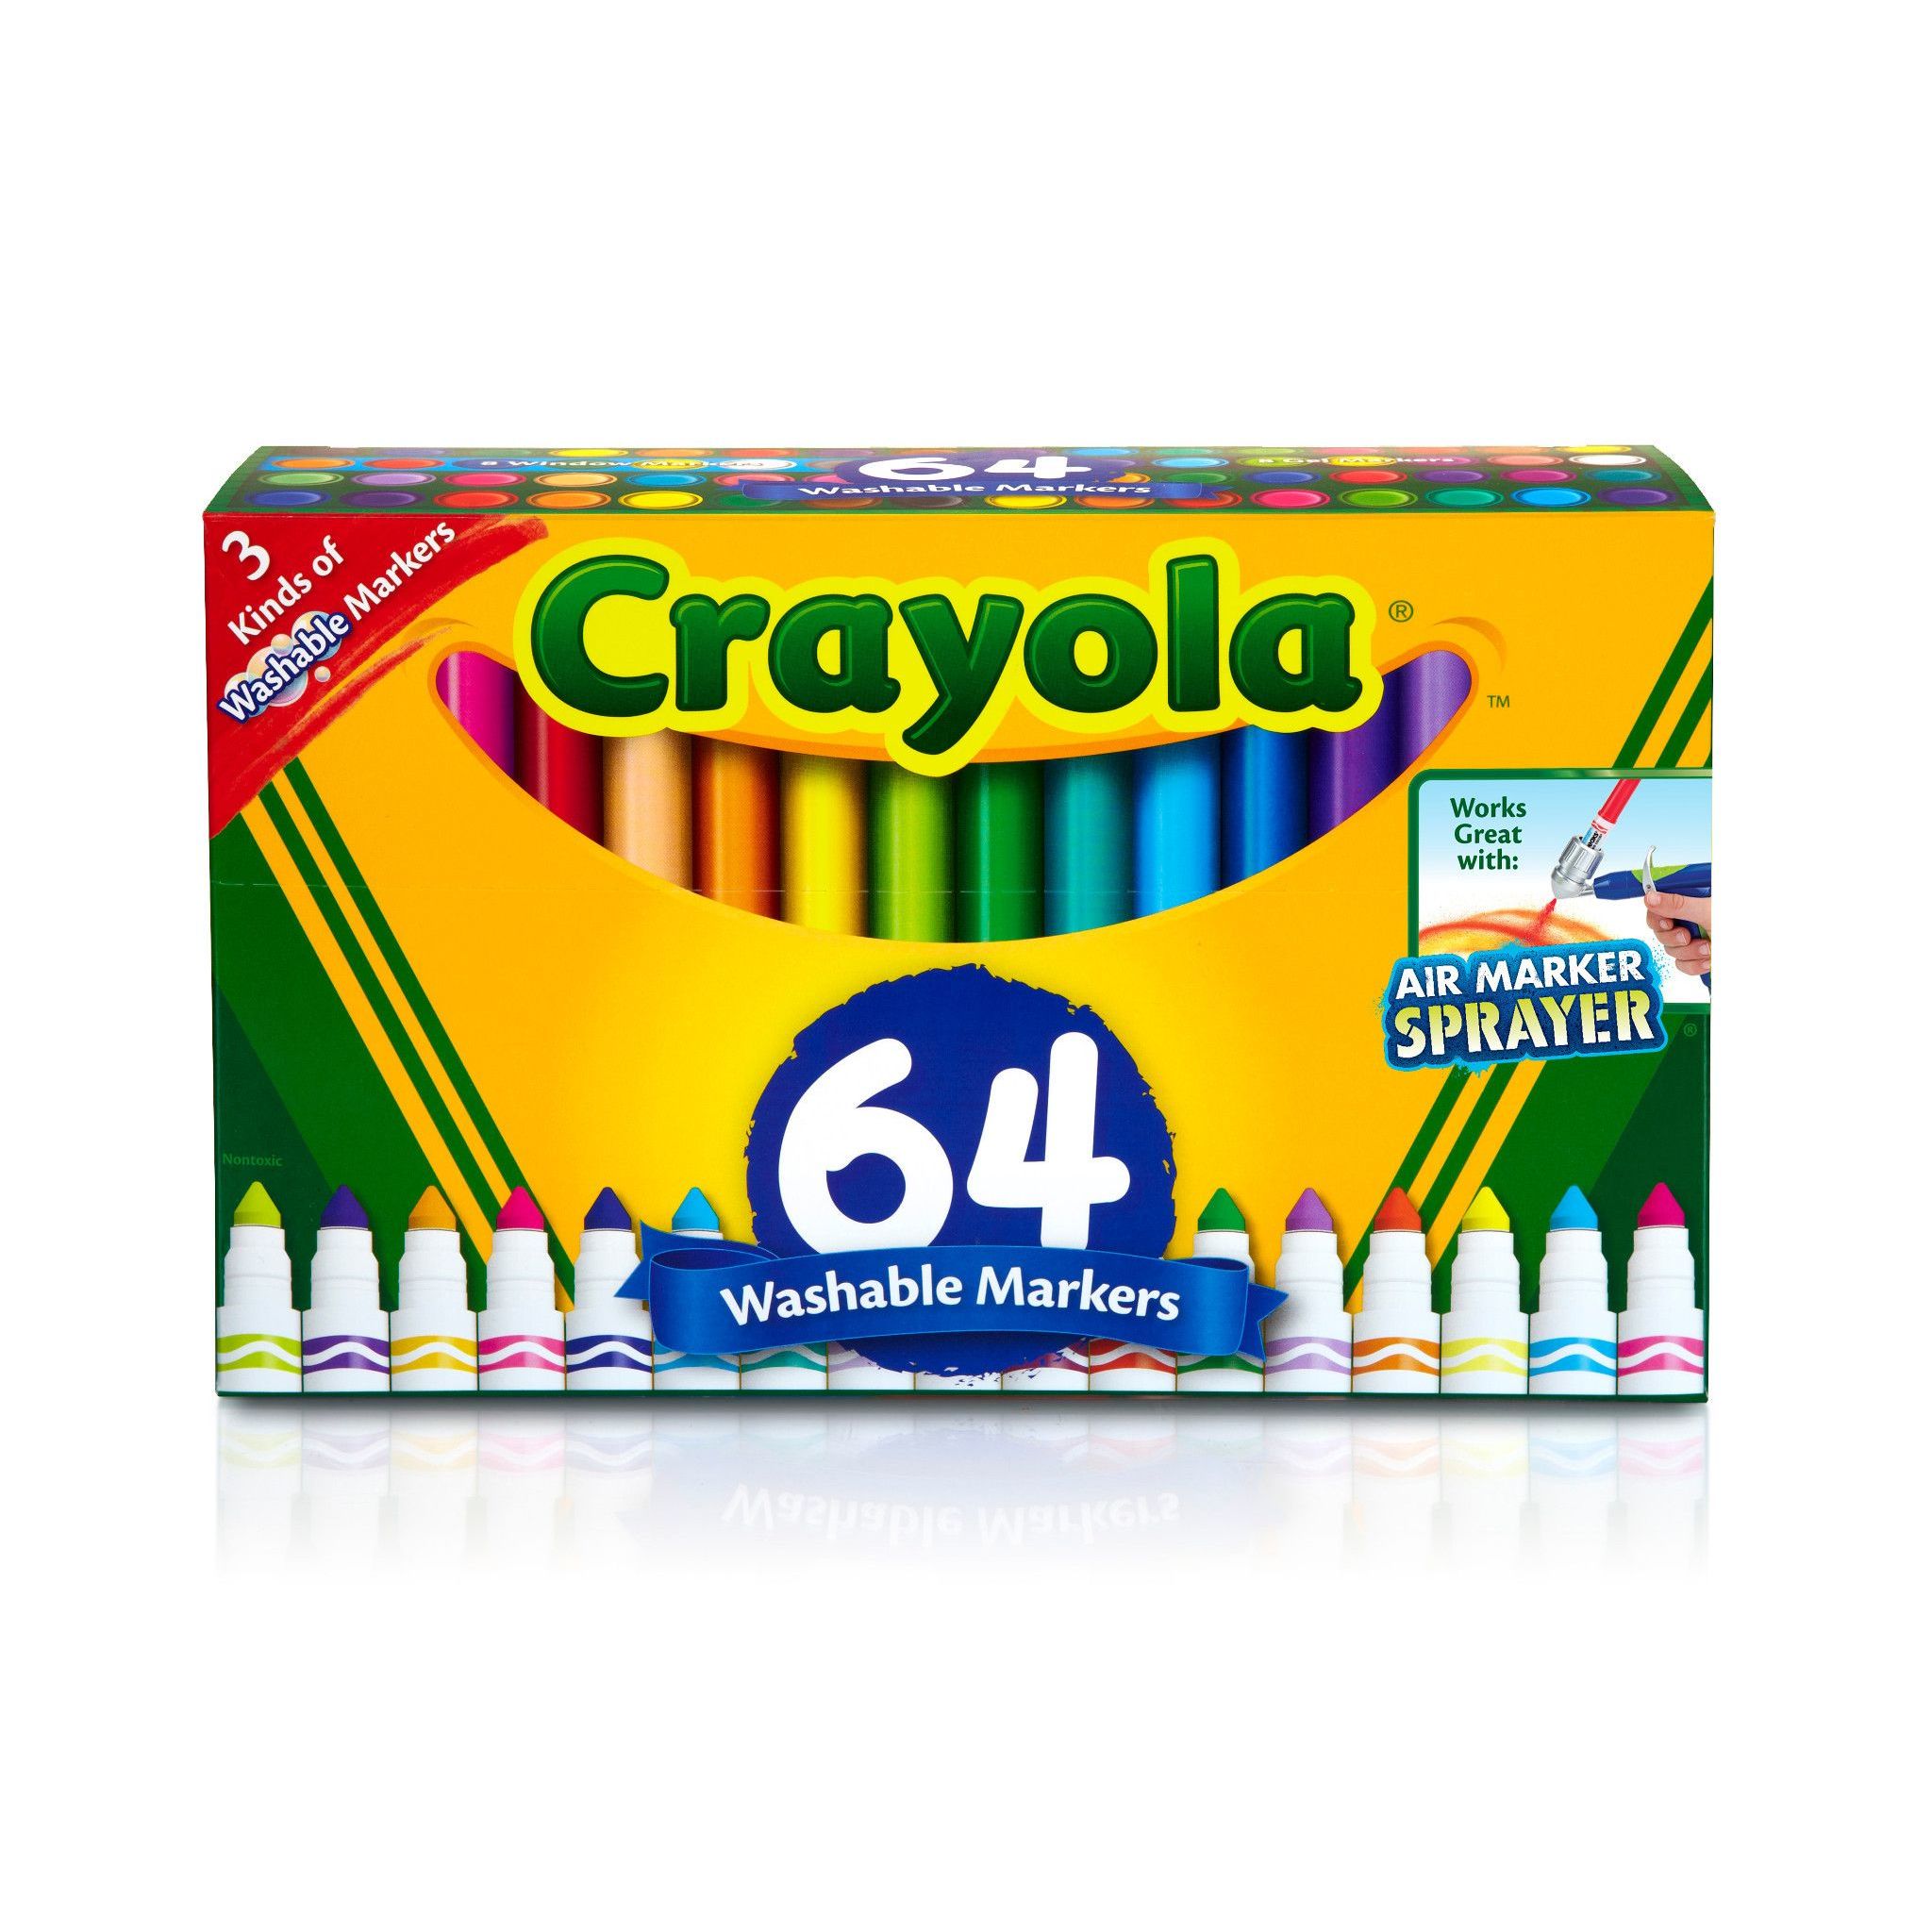 Crayola Washable Broad Line Markers with Gel FX Markers, 64 Ct, Art Supplies for Teens, Gifts - image 3 of 10